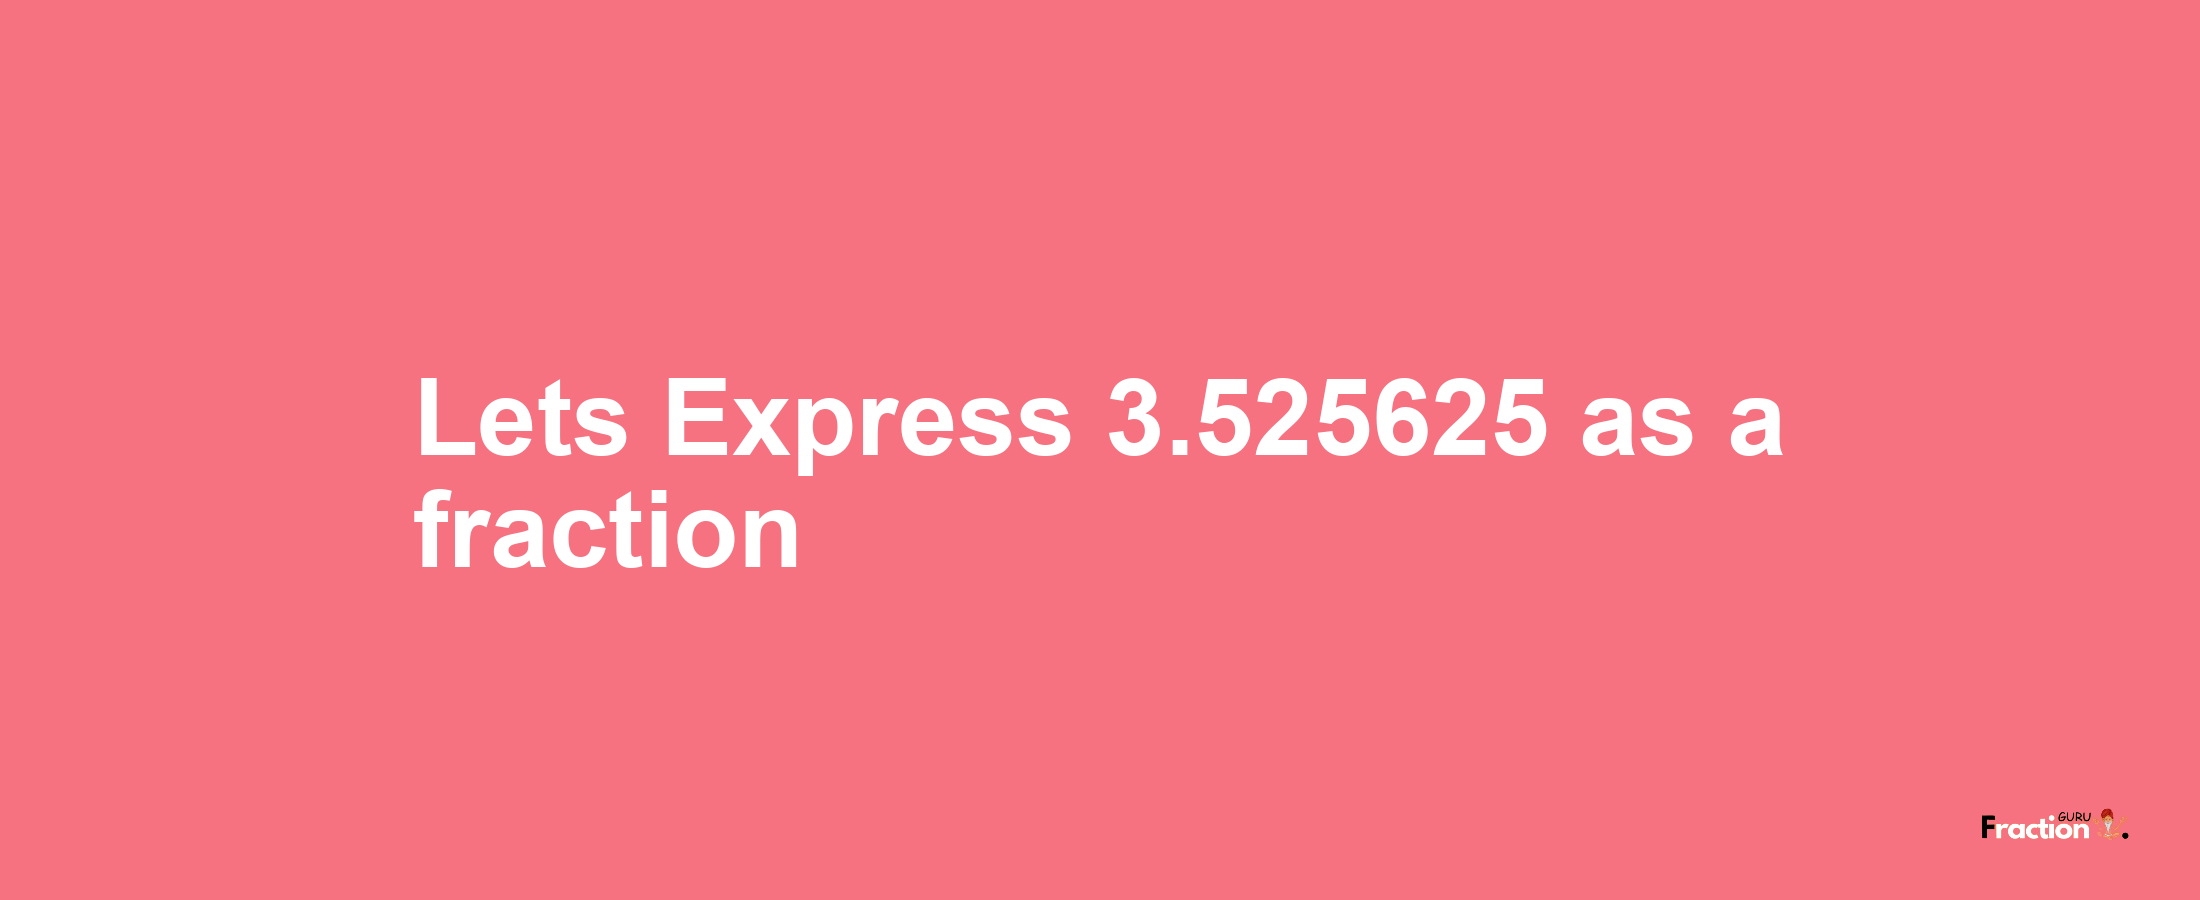 Lets Express 3.525625 as afraction